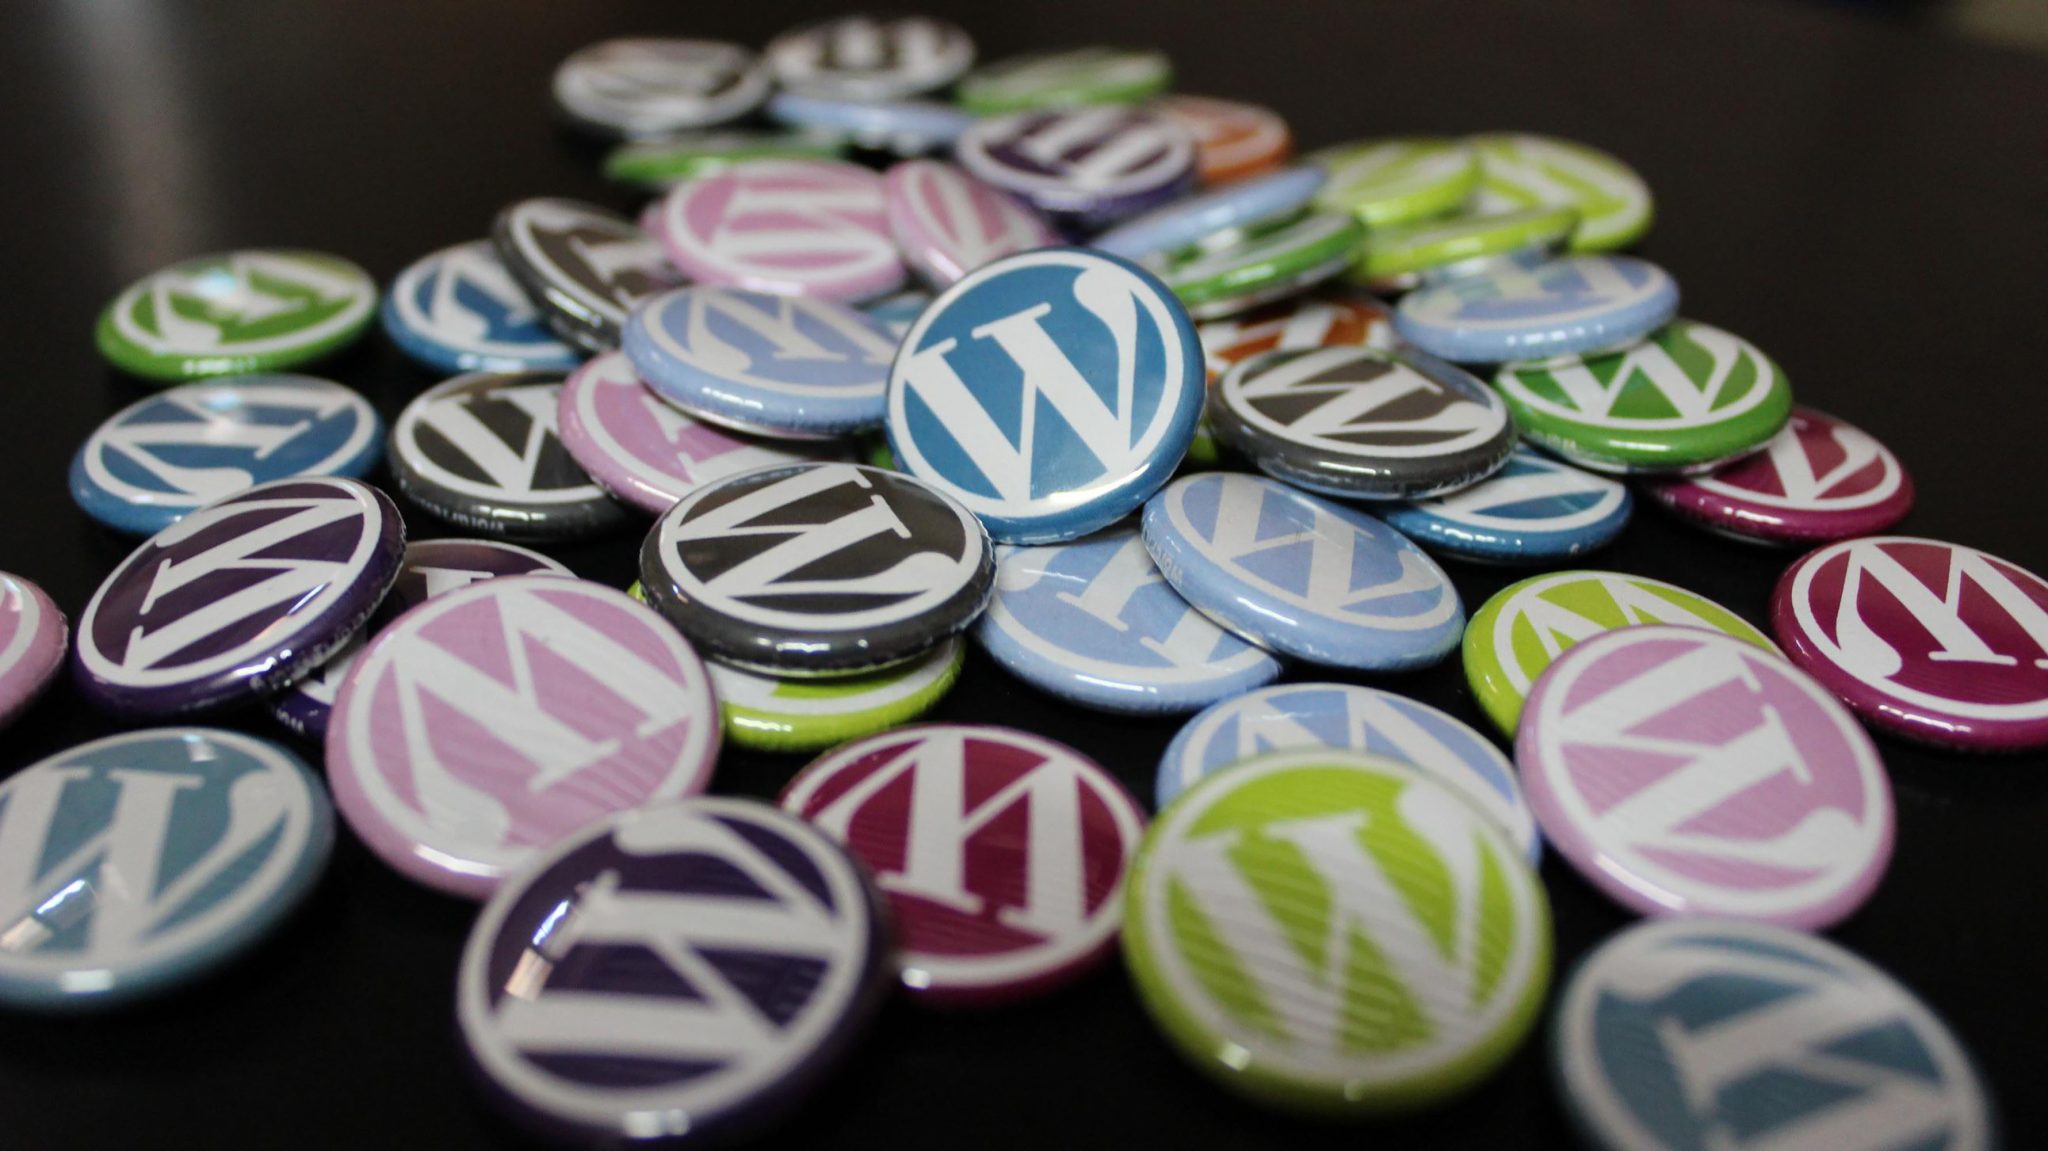 WordPress Buttons sent by community team to our WordCamp